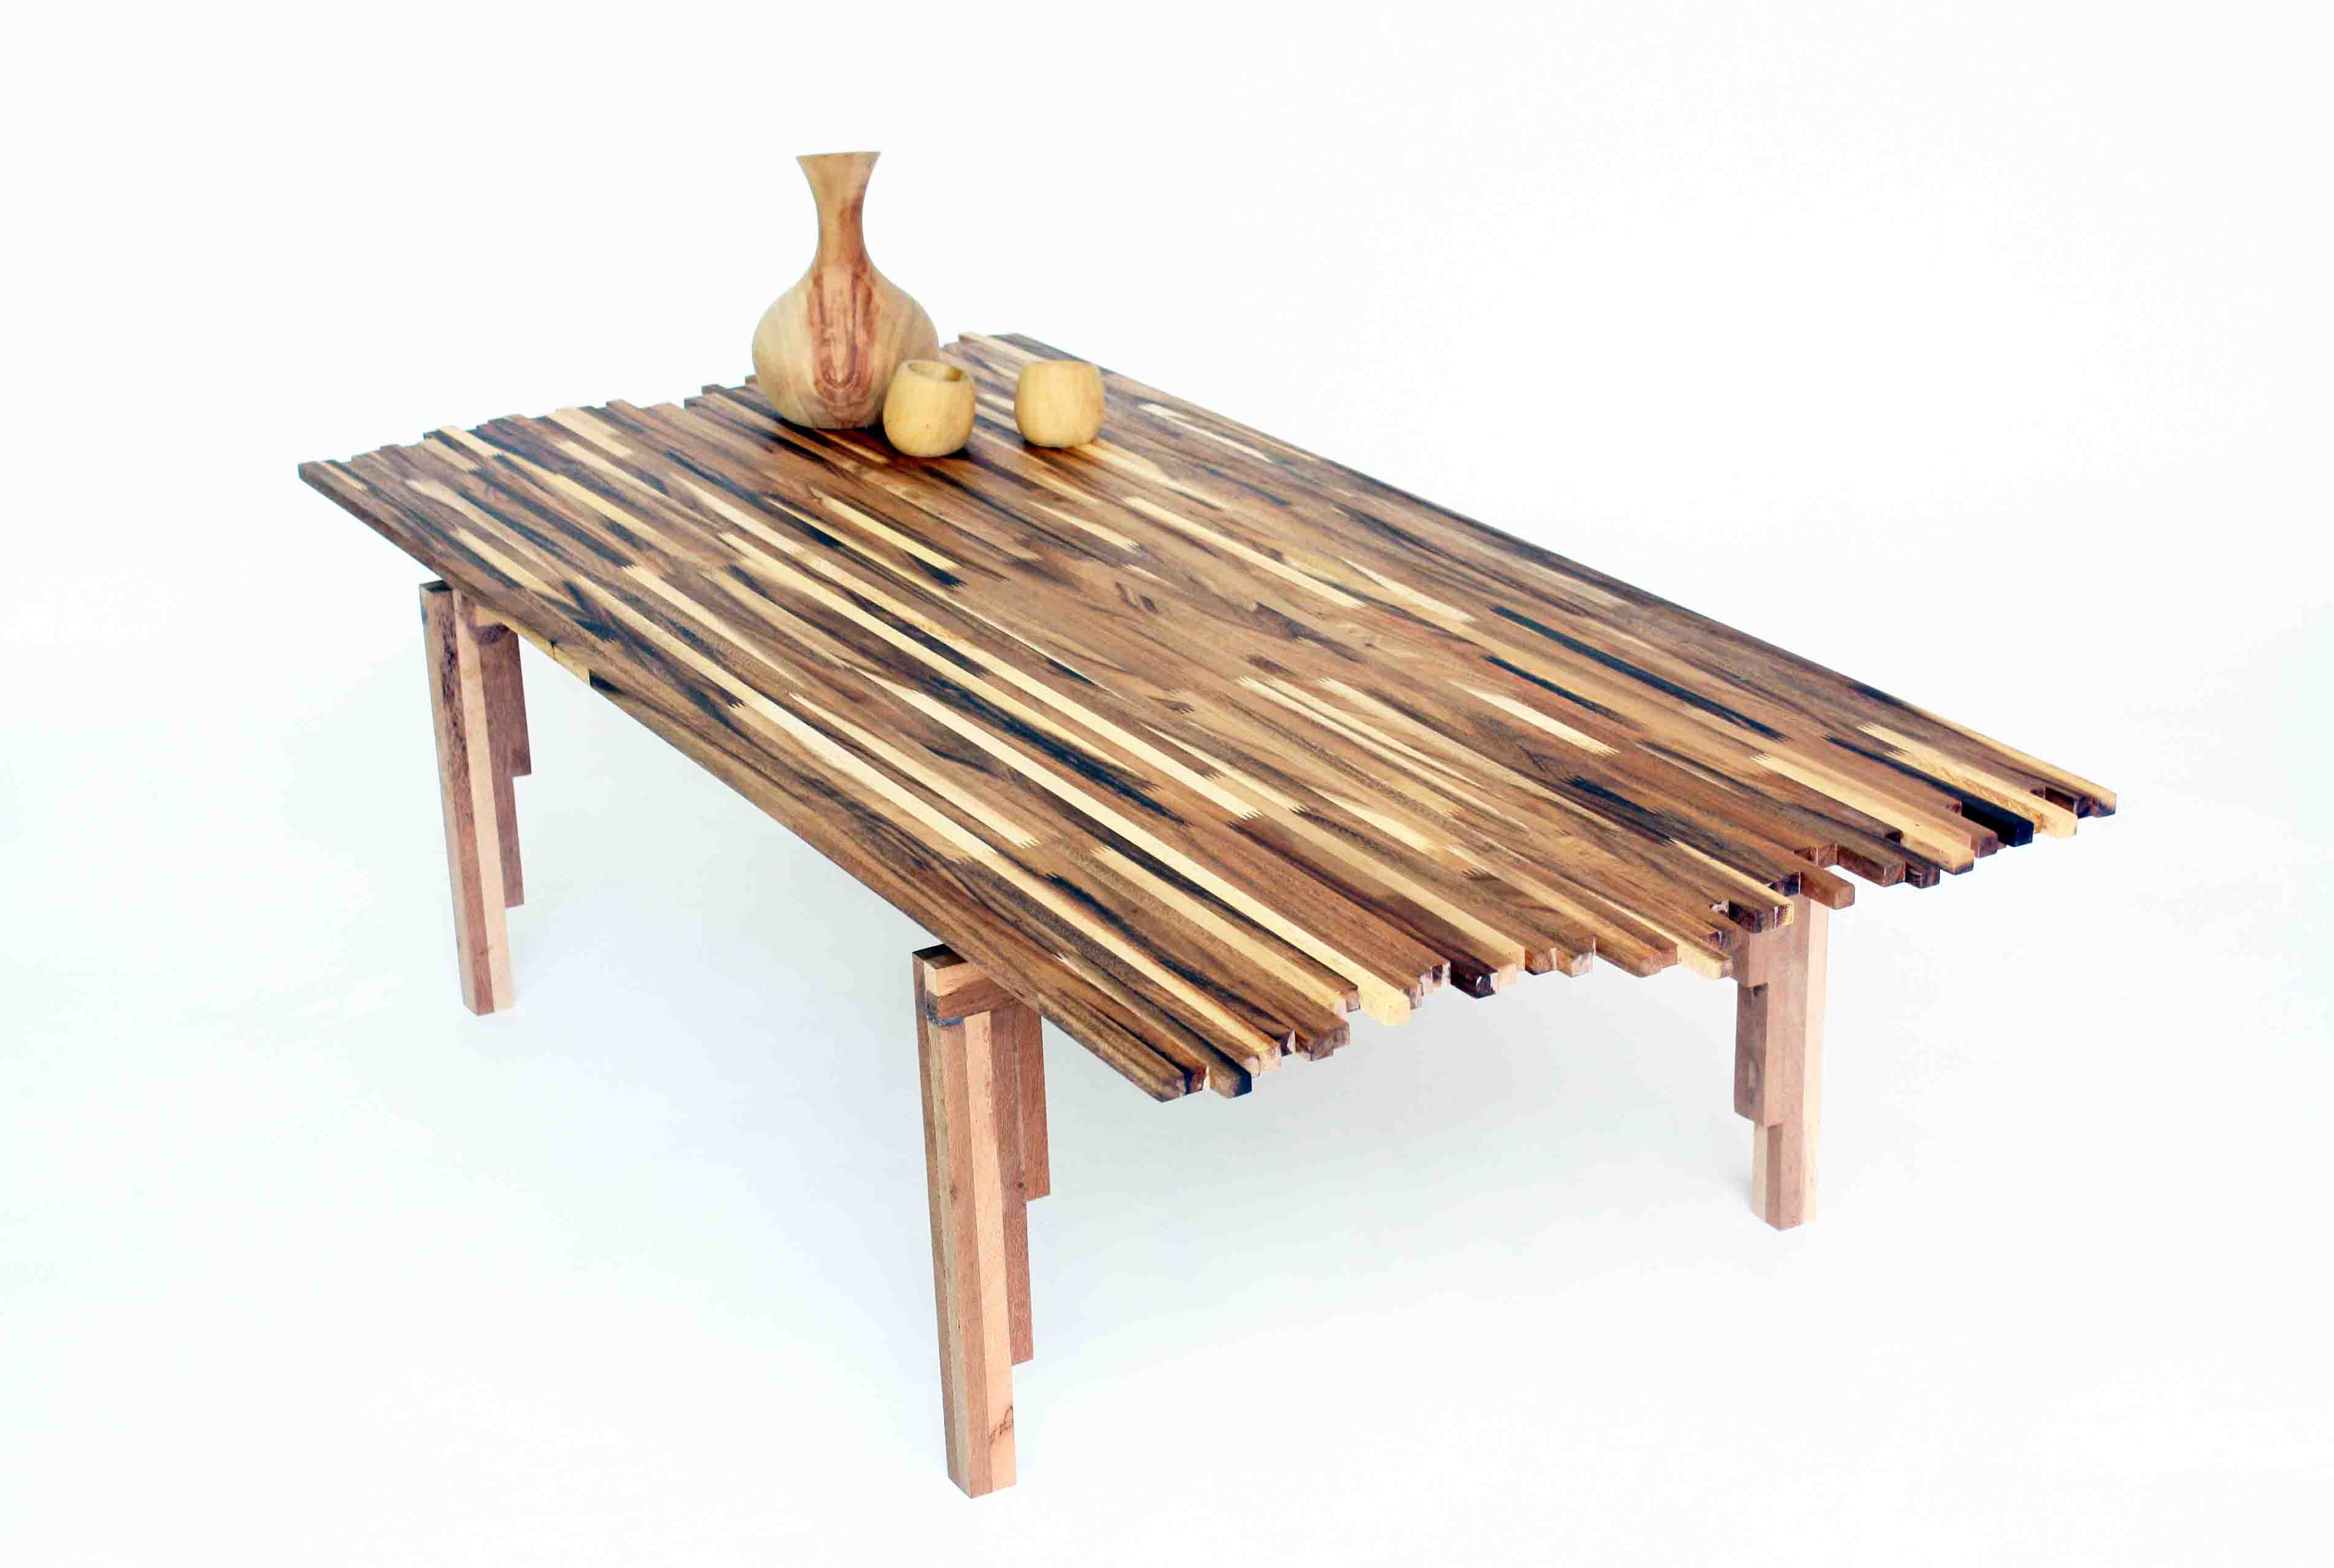 wood table designs photo - 4